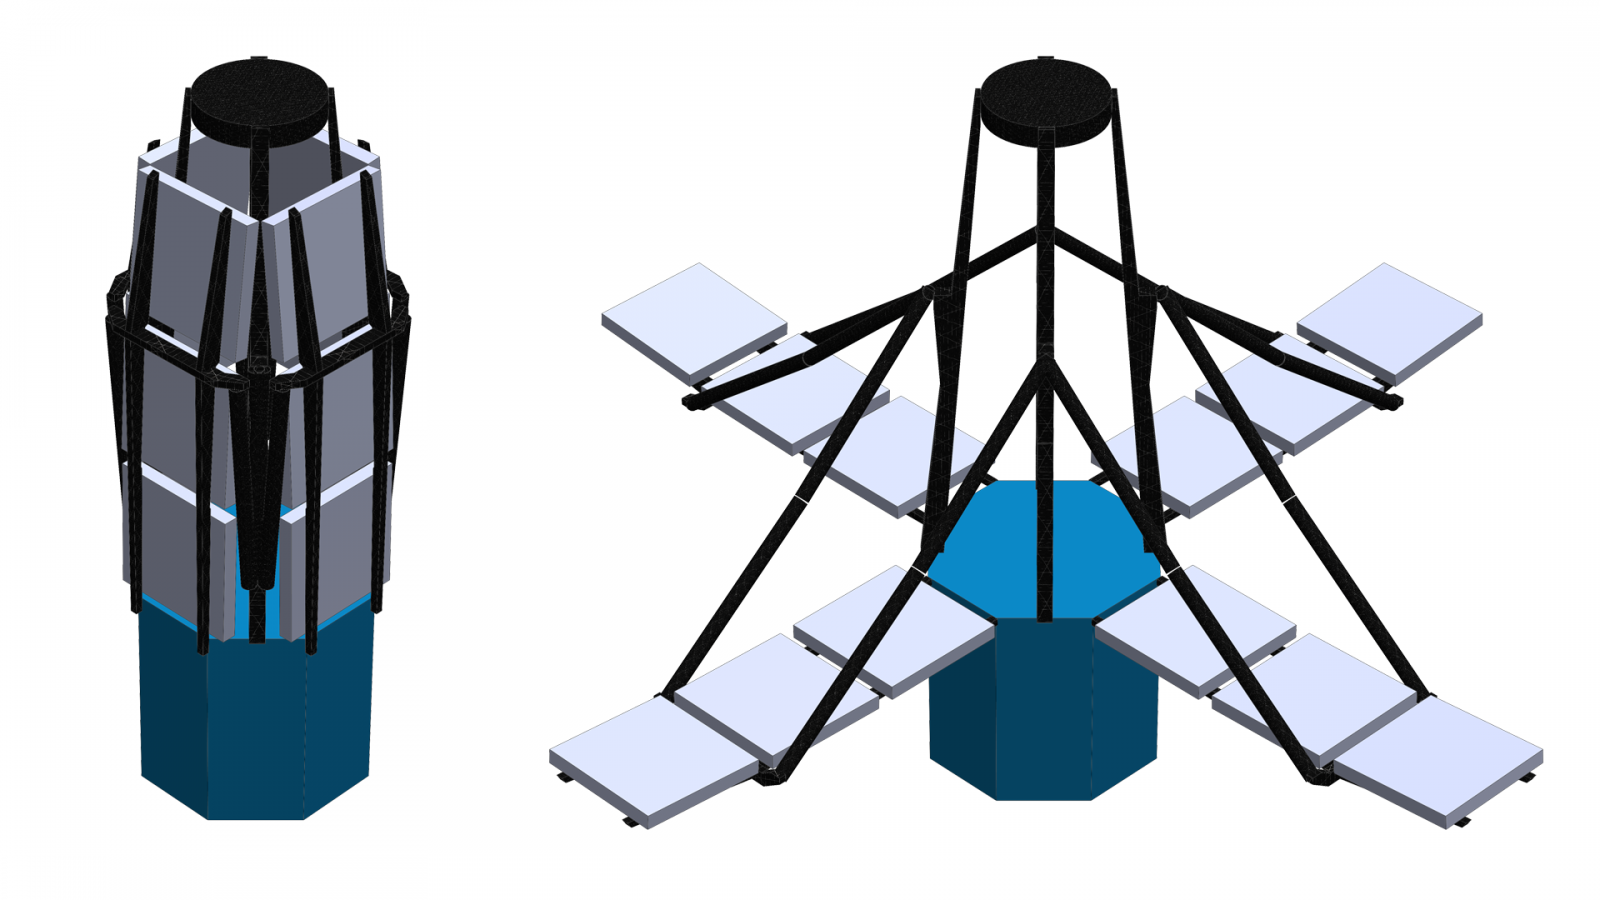 For installation aboard a launch vehicle, a space telescope using technology developed for DISCIT will fold up into the compact shape seen at the left, but will expand its segmented sparse subapertures, right, once deployed.